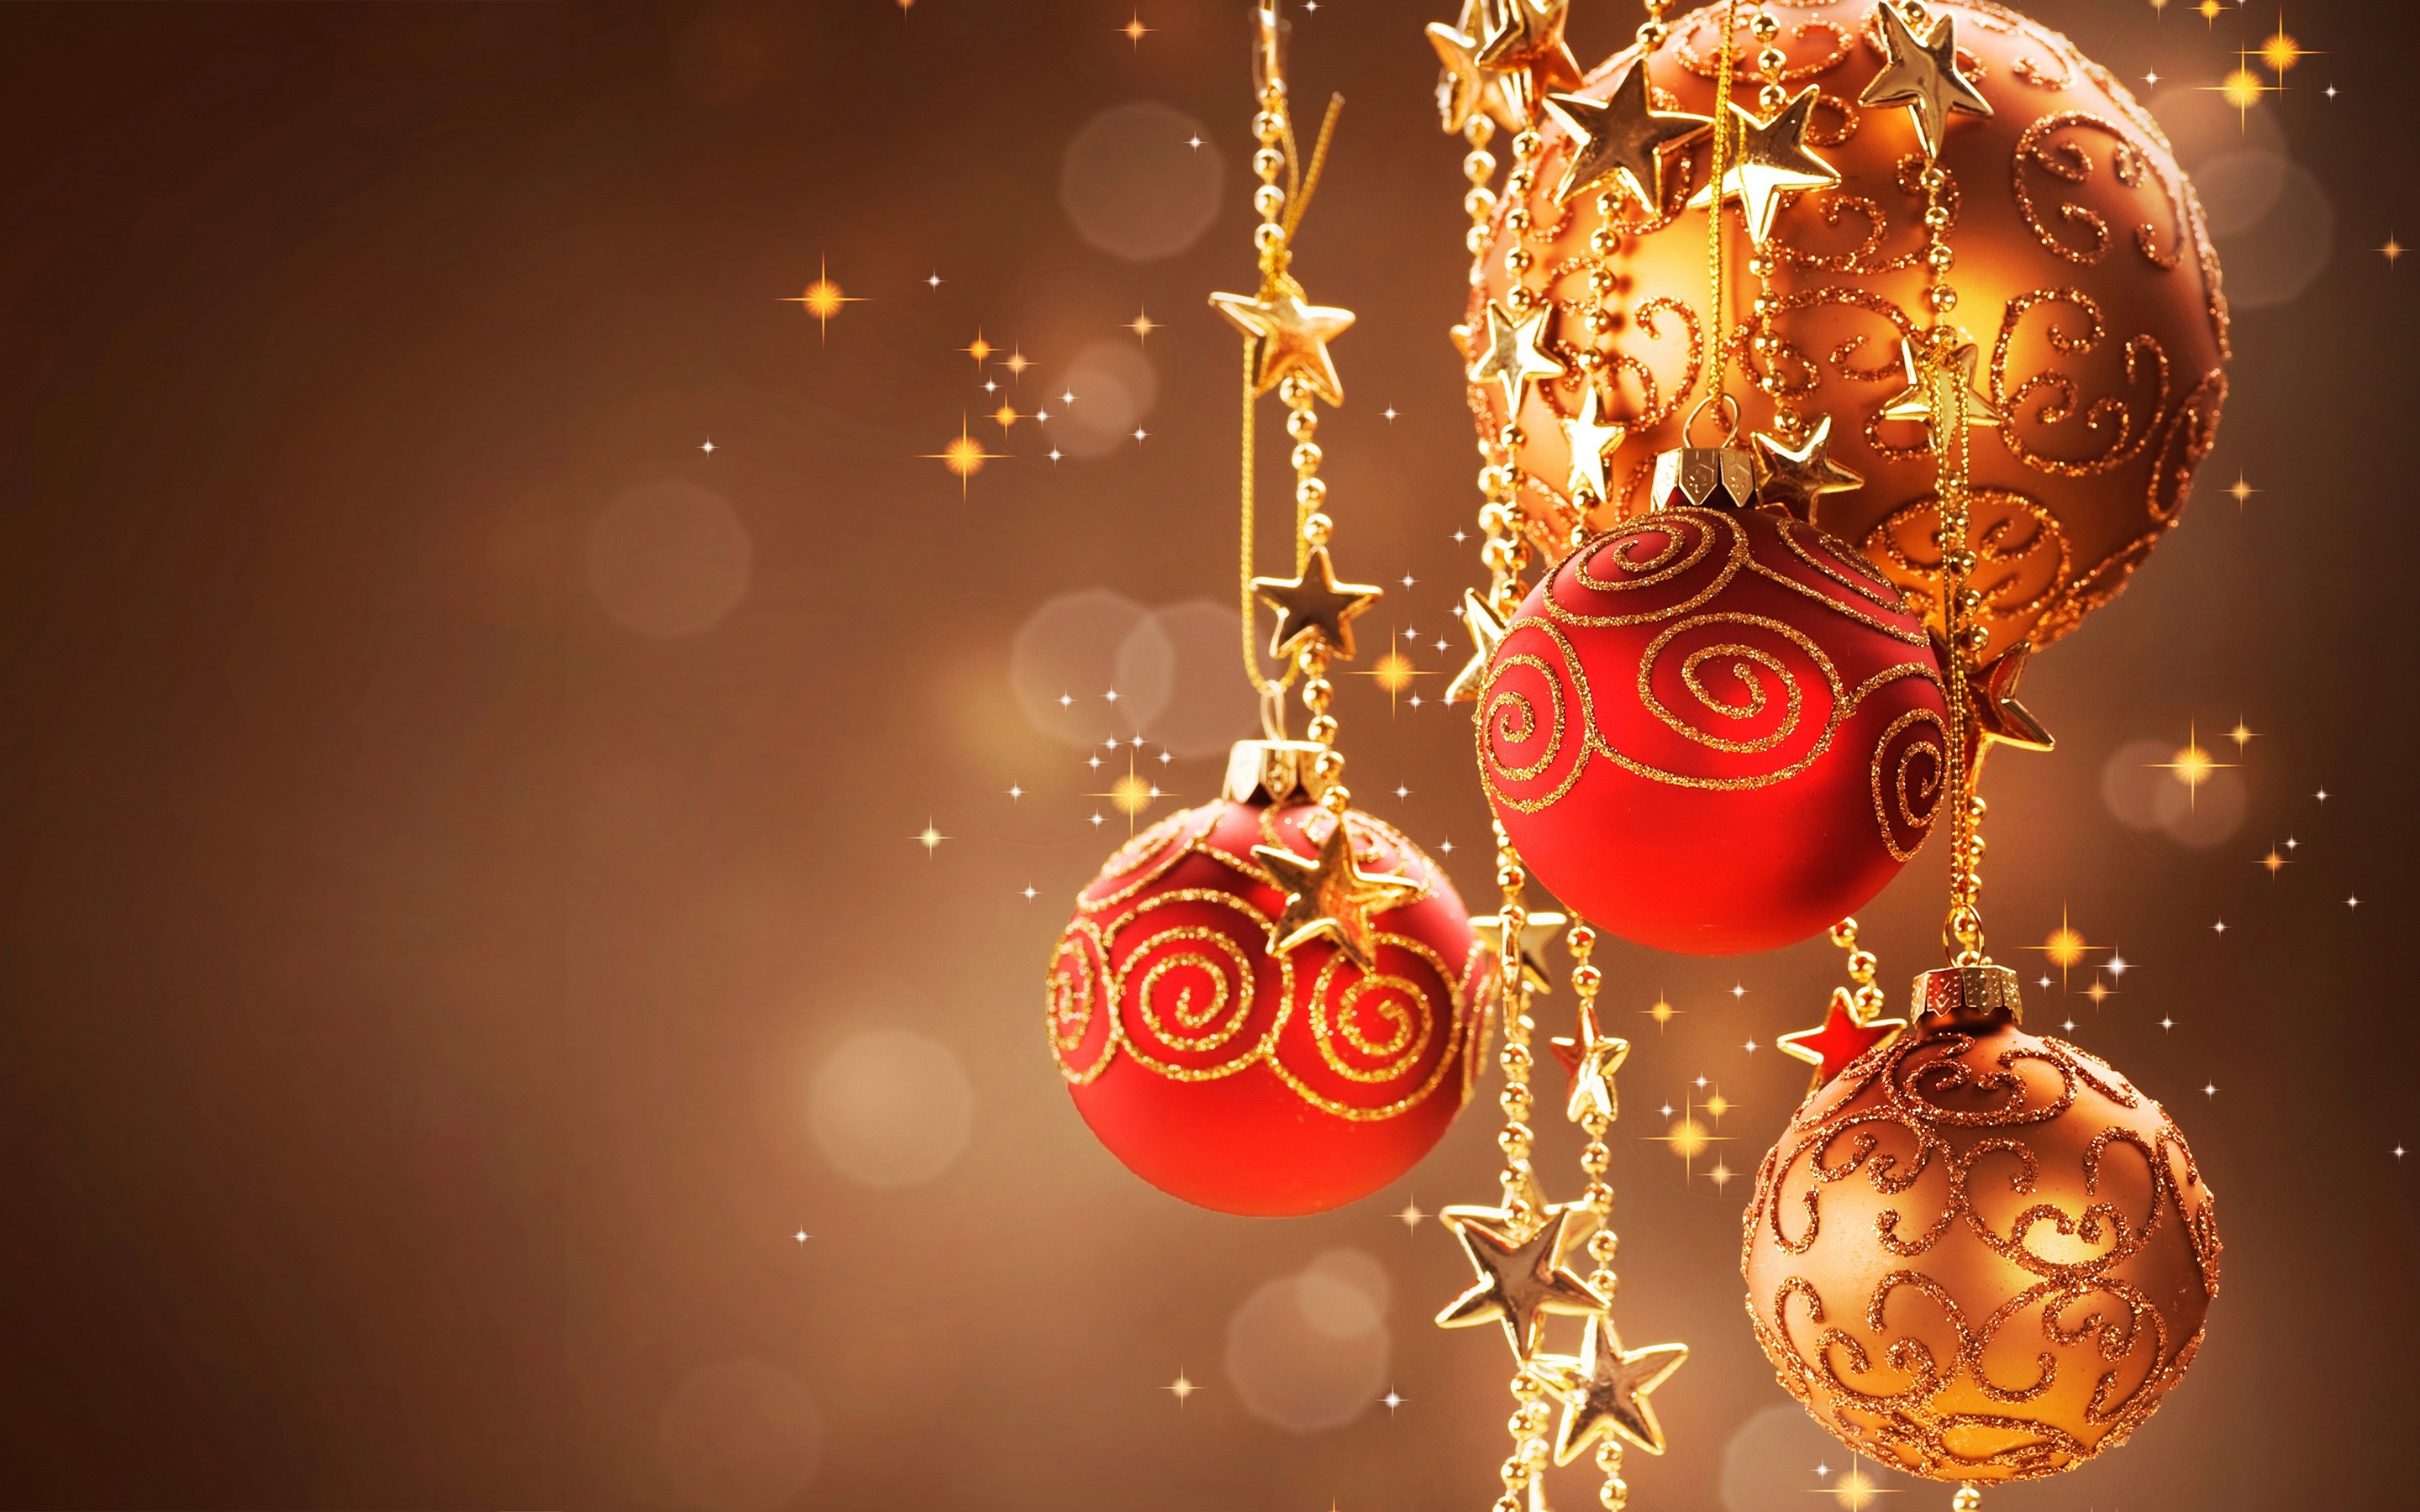 Christmas Wallpapers & Images: Christmas HD Wallpapers for Desktop